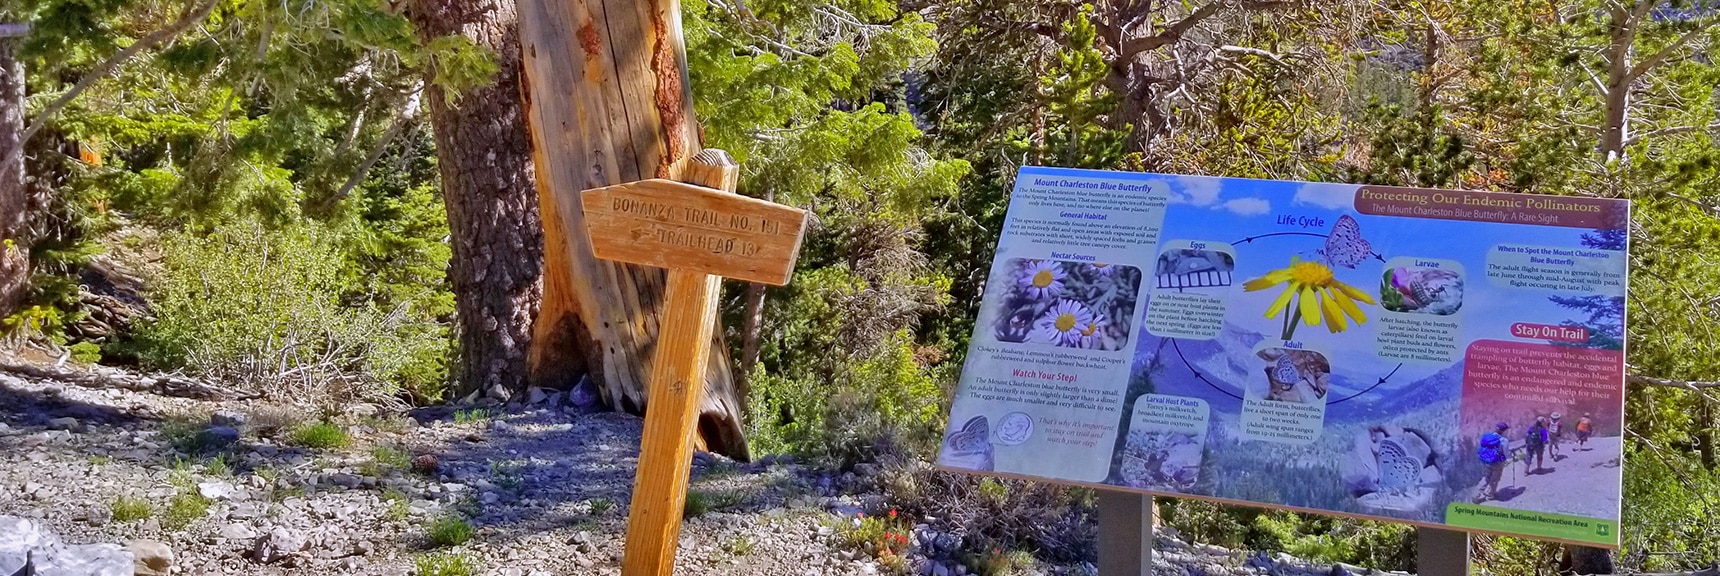 13-Mile Bonanza Trail Begins at Bristlecone Pine Trail and Goes to Cold Creek | Base of McFarland Peak via Bristlecone Pine Trail and Bonanza Trail | Lee Canyon | Spring Mountains, Nevada